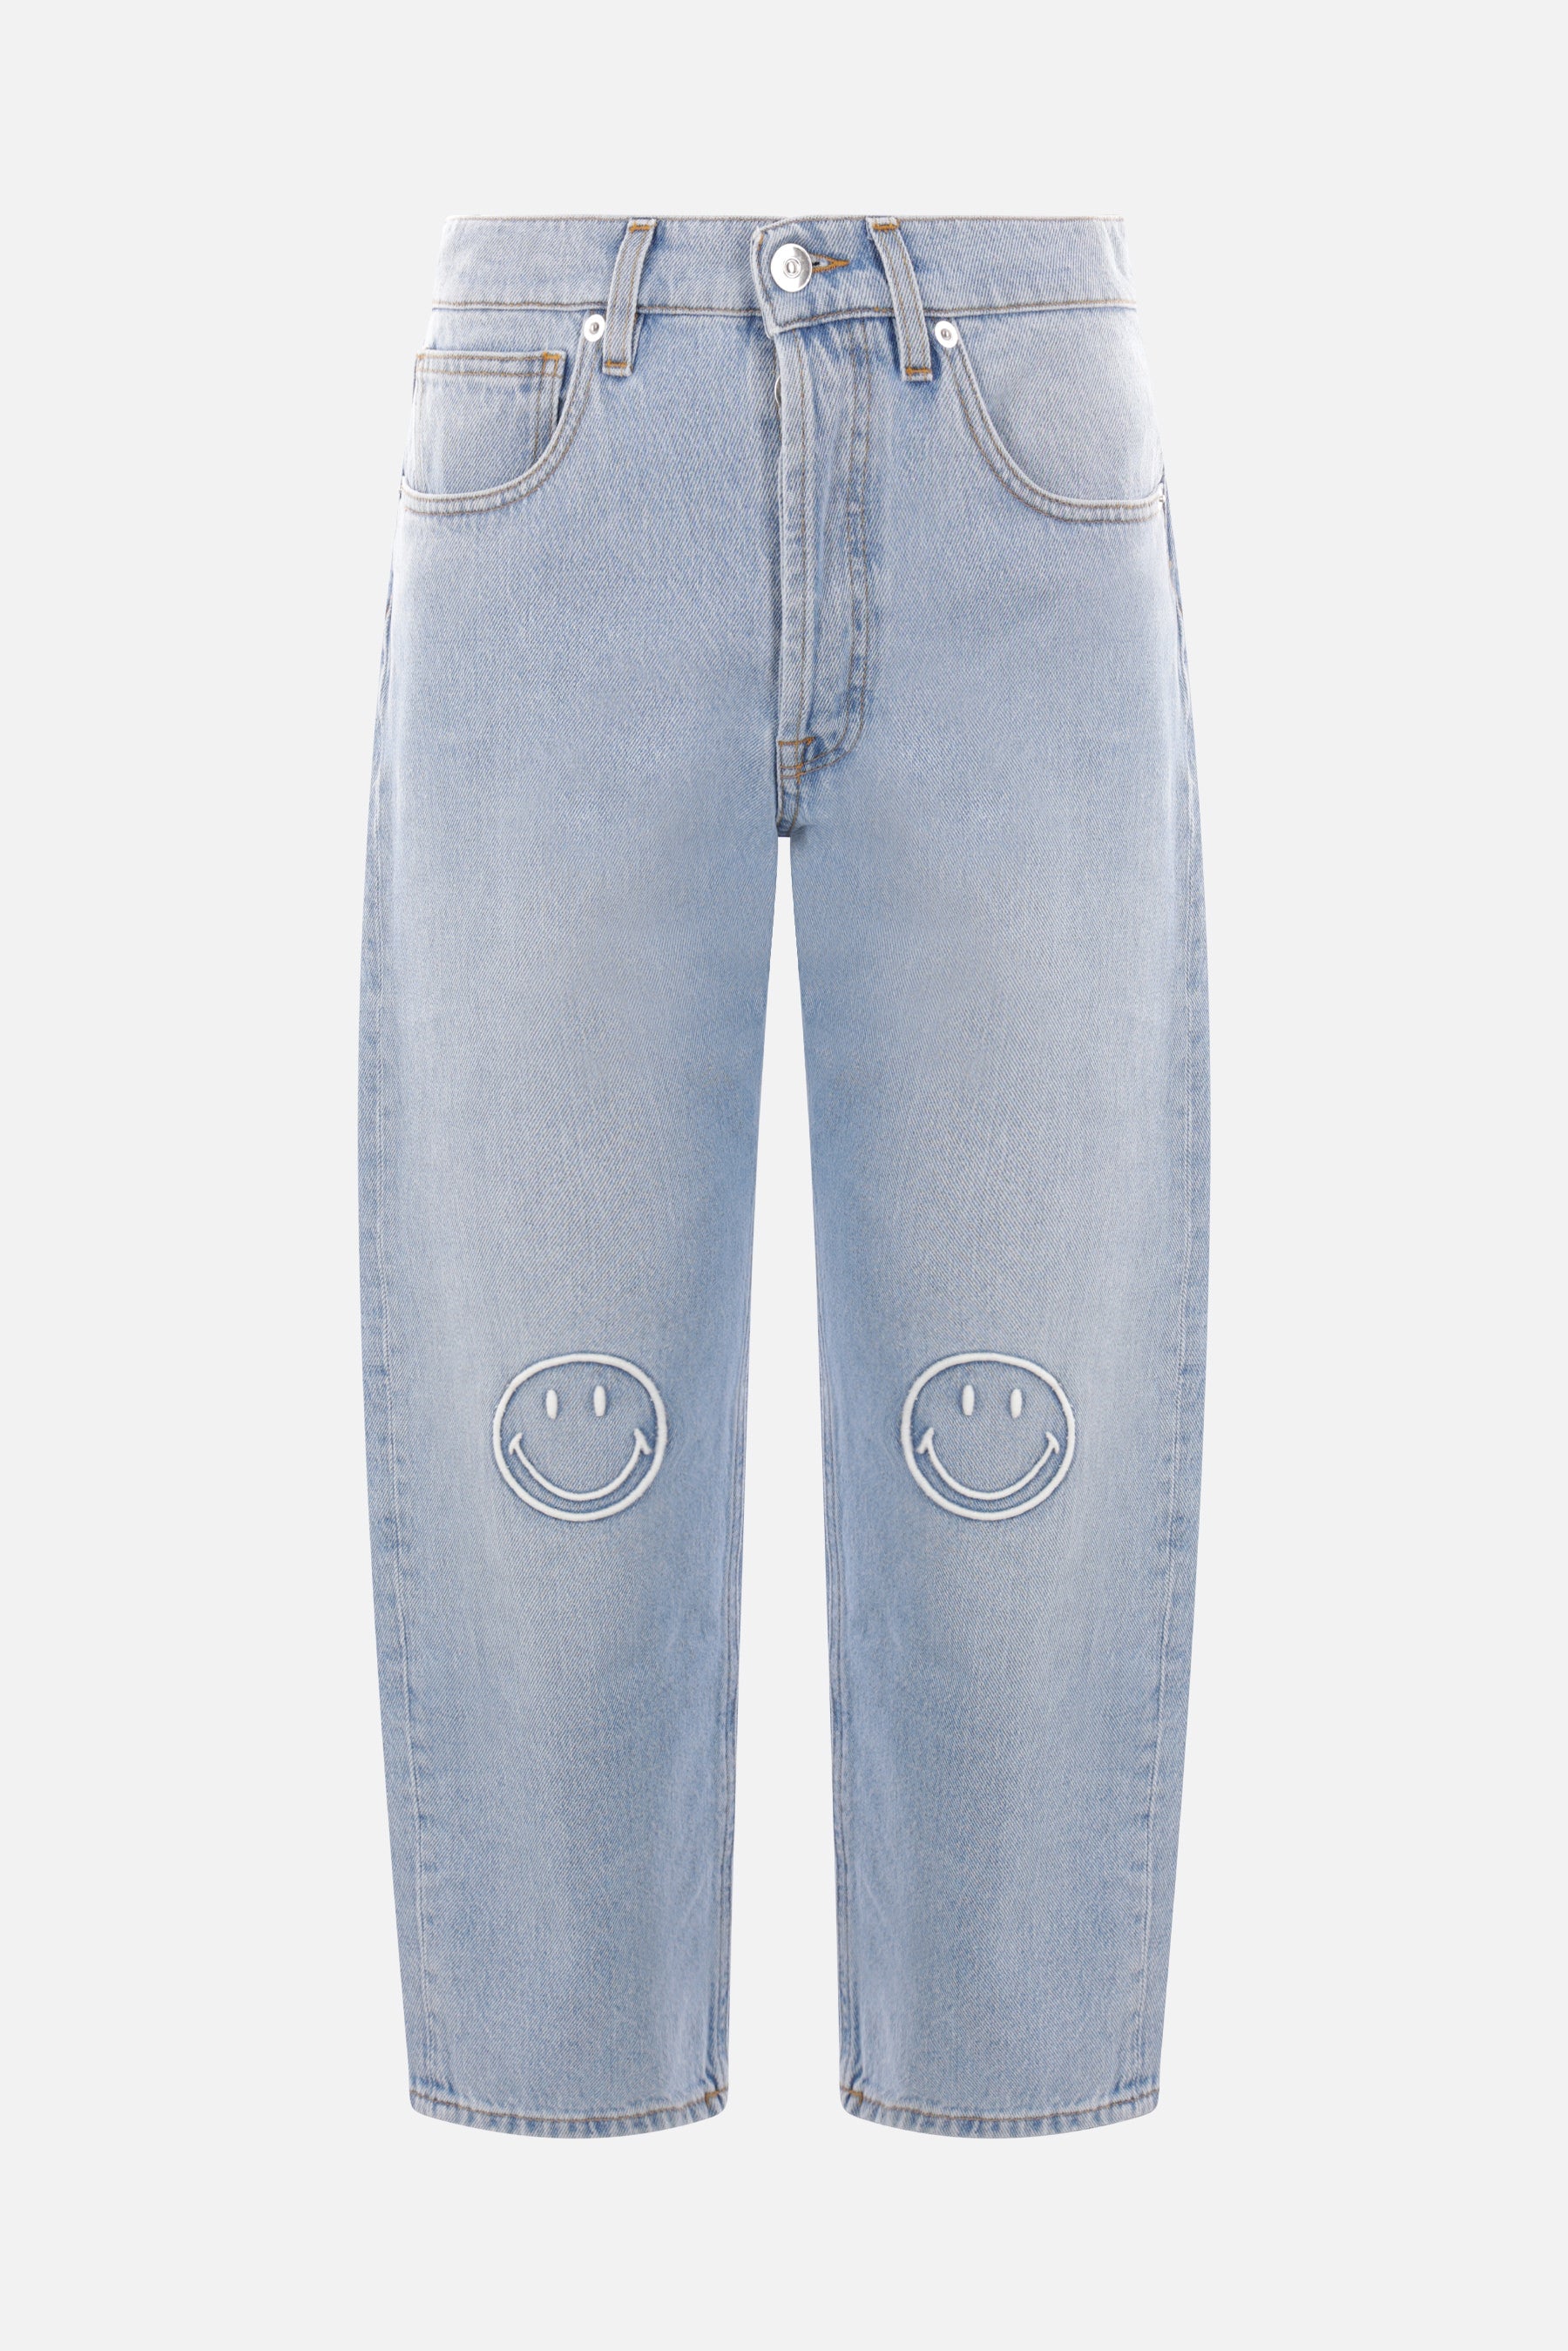 jeans cropped Outline in denim